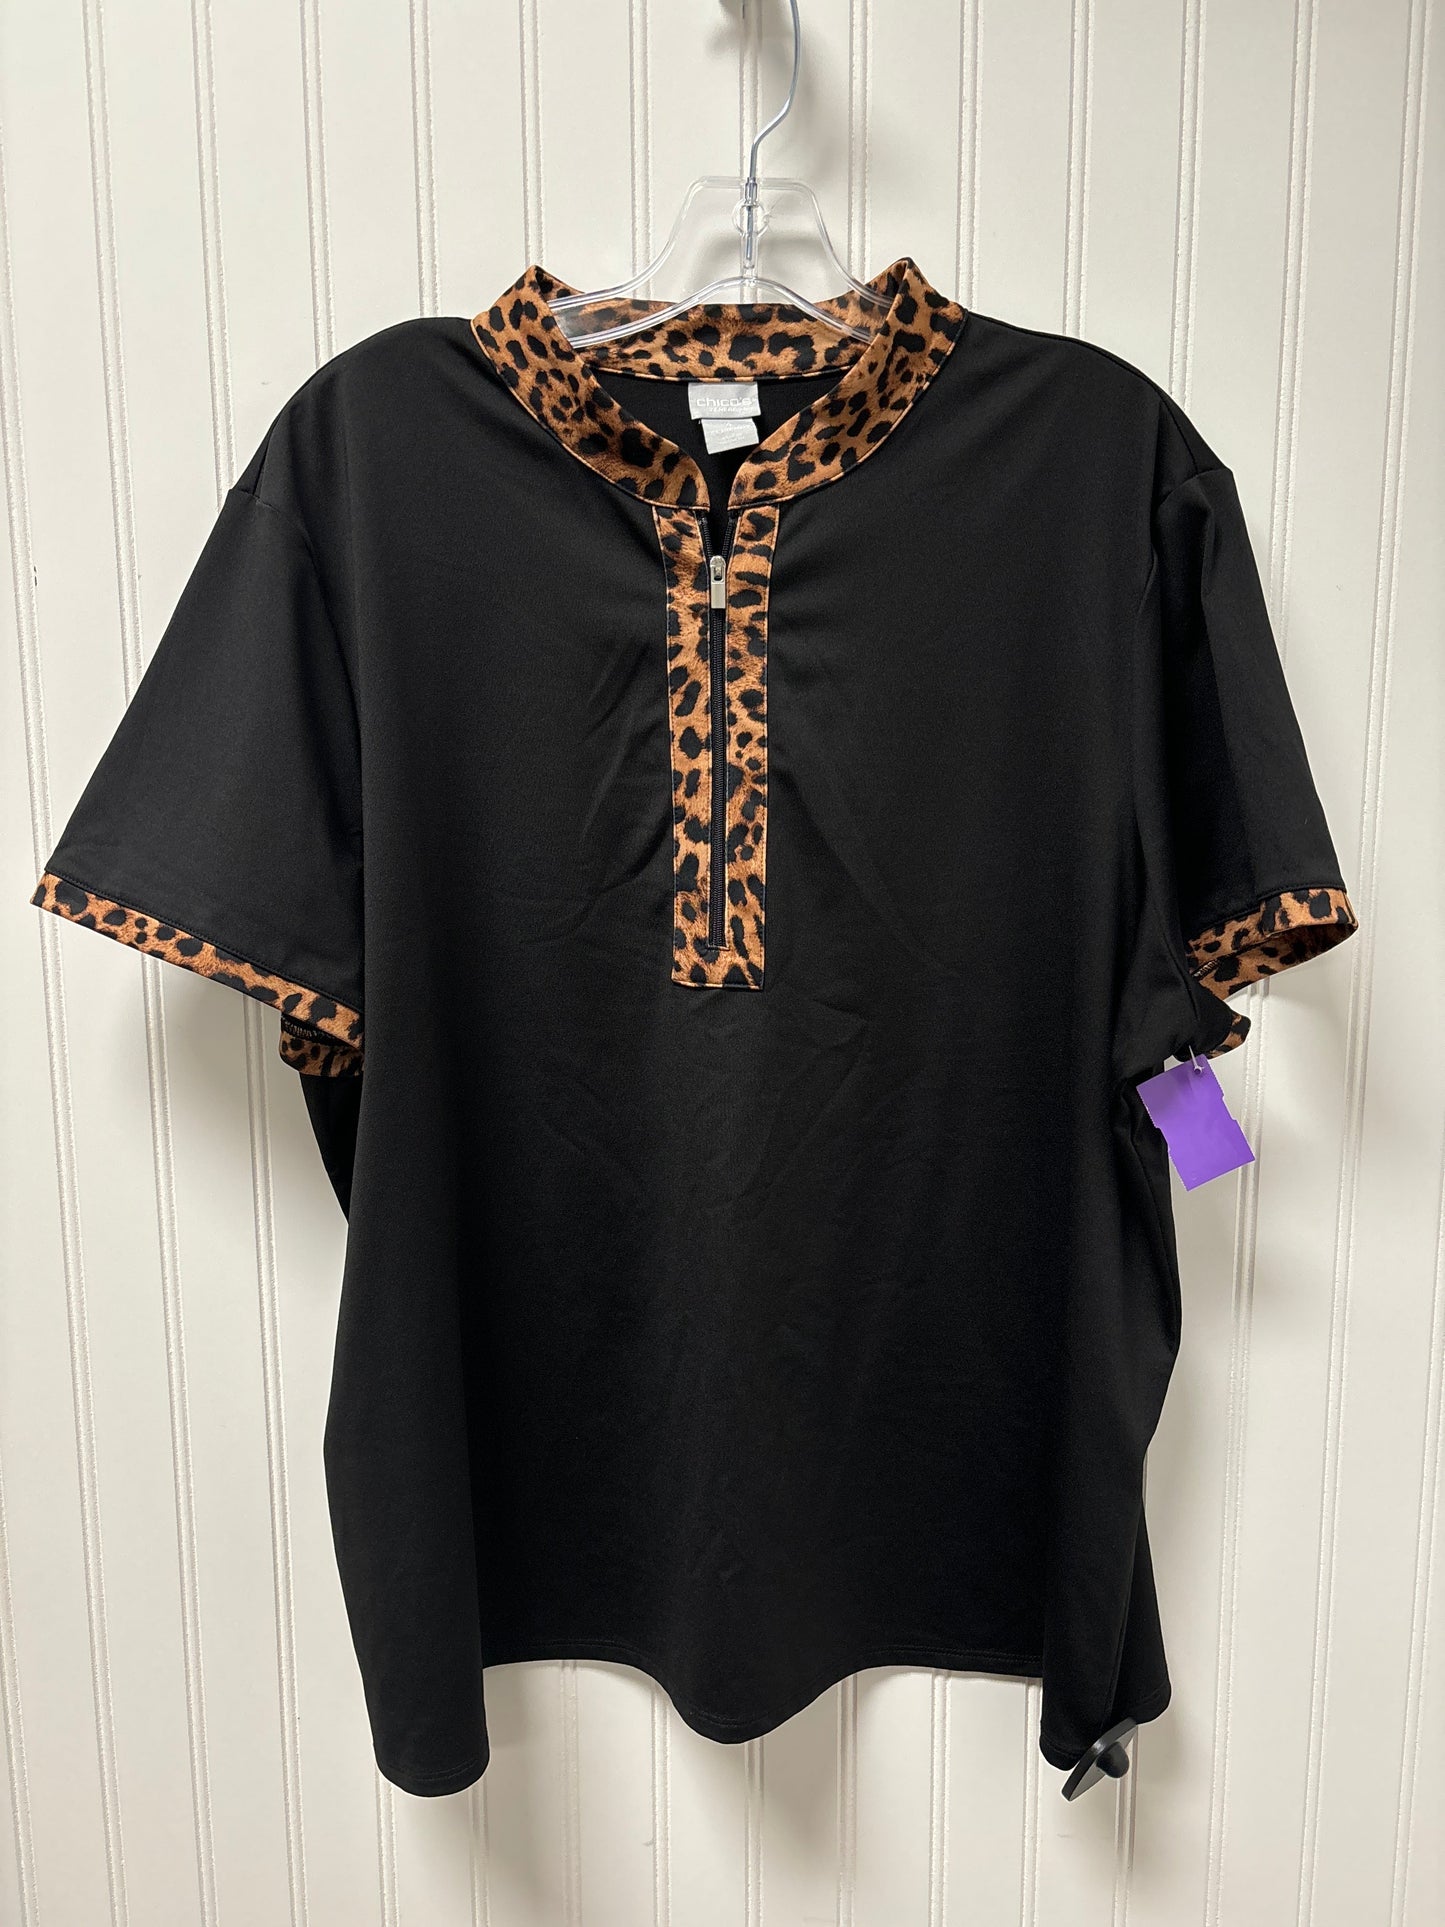 Black Athletic Top Short Sleeve Chicos, Size 1x